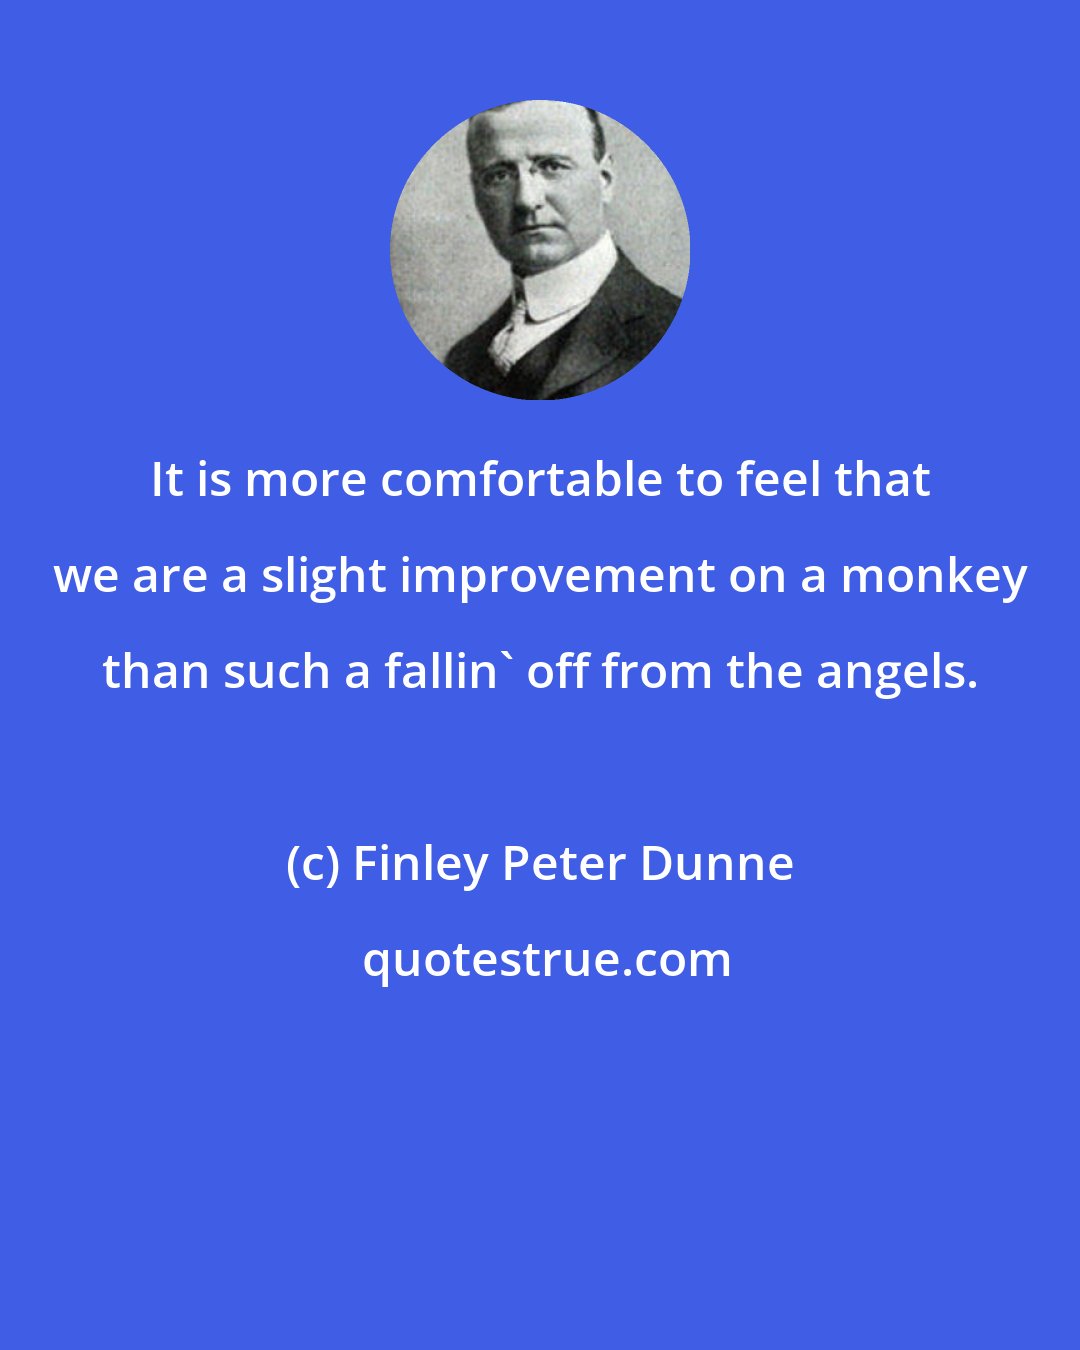 Finley Peter Dunne: It is more comfortable to feel that we are a slight improvement on a monkey than such a fallin' off from the angels.